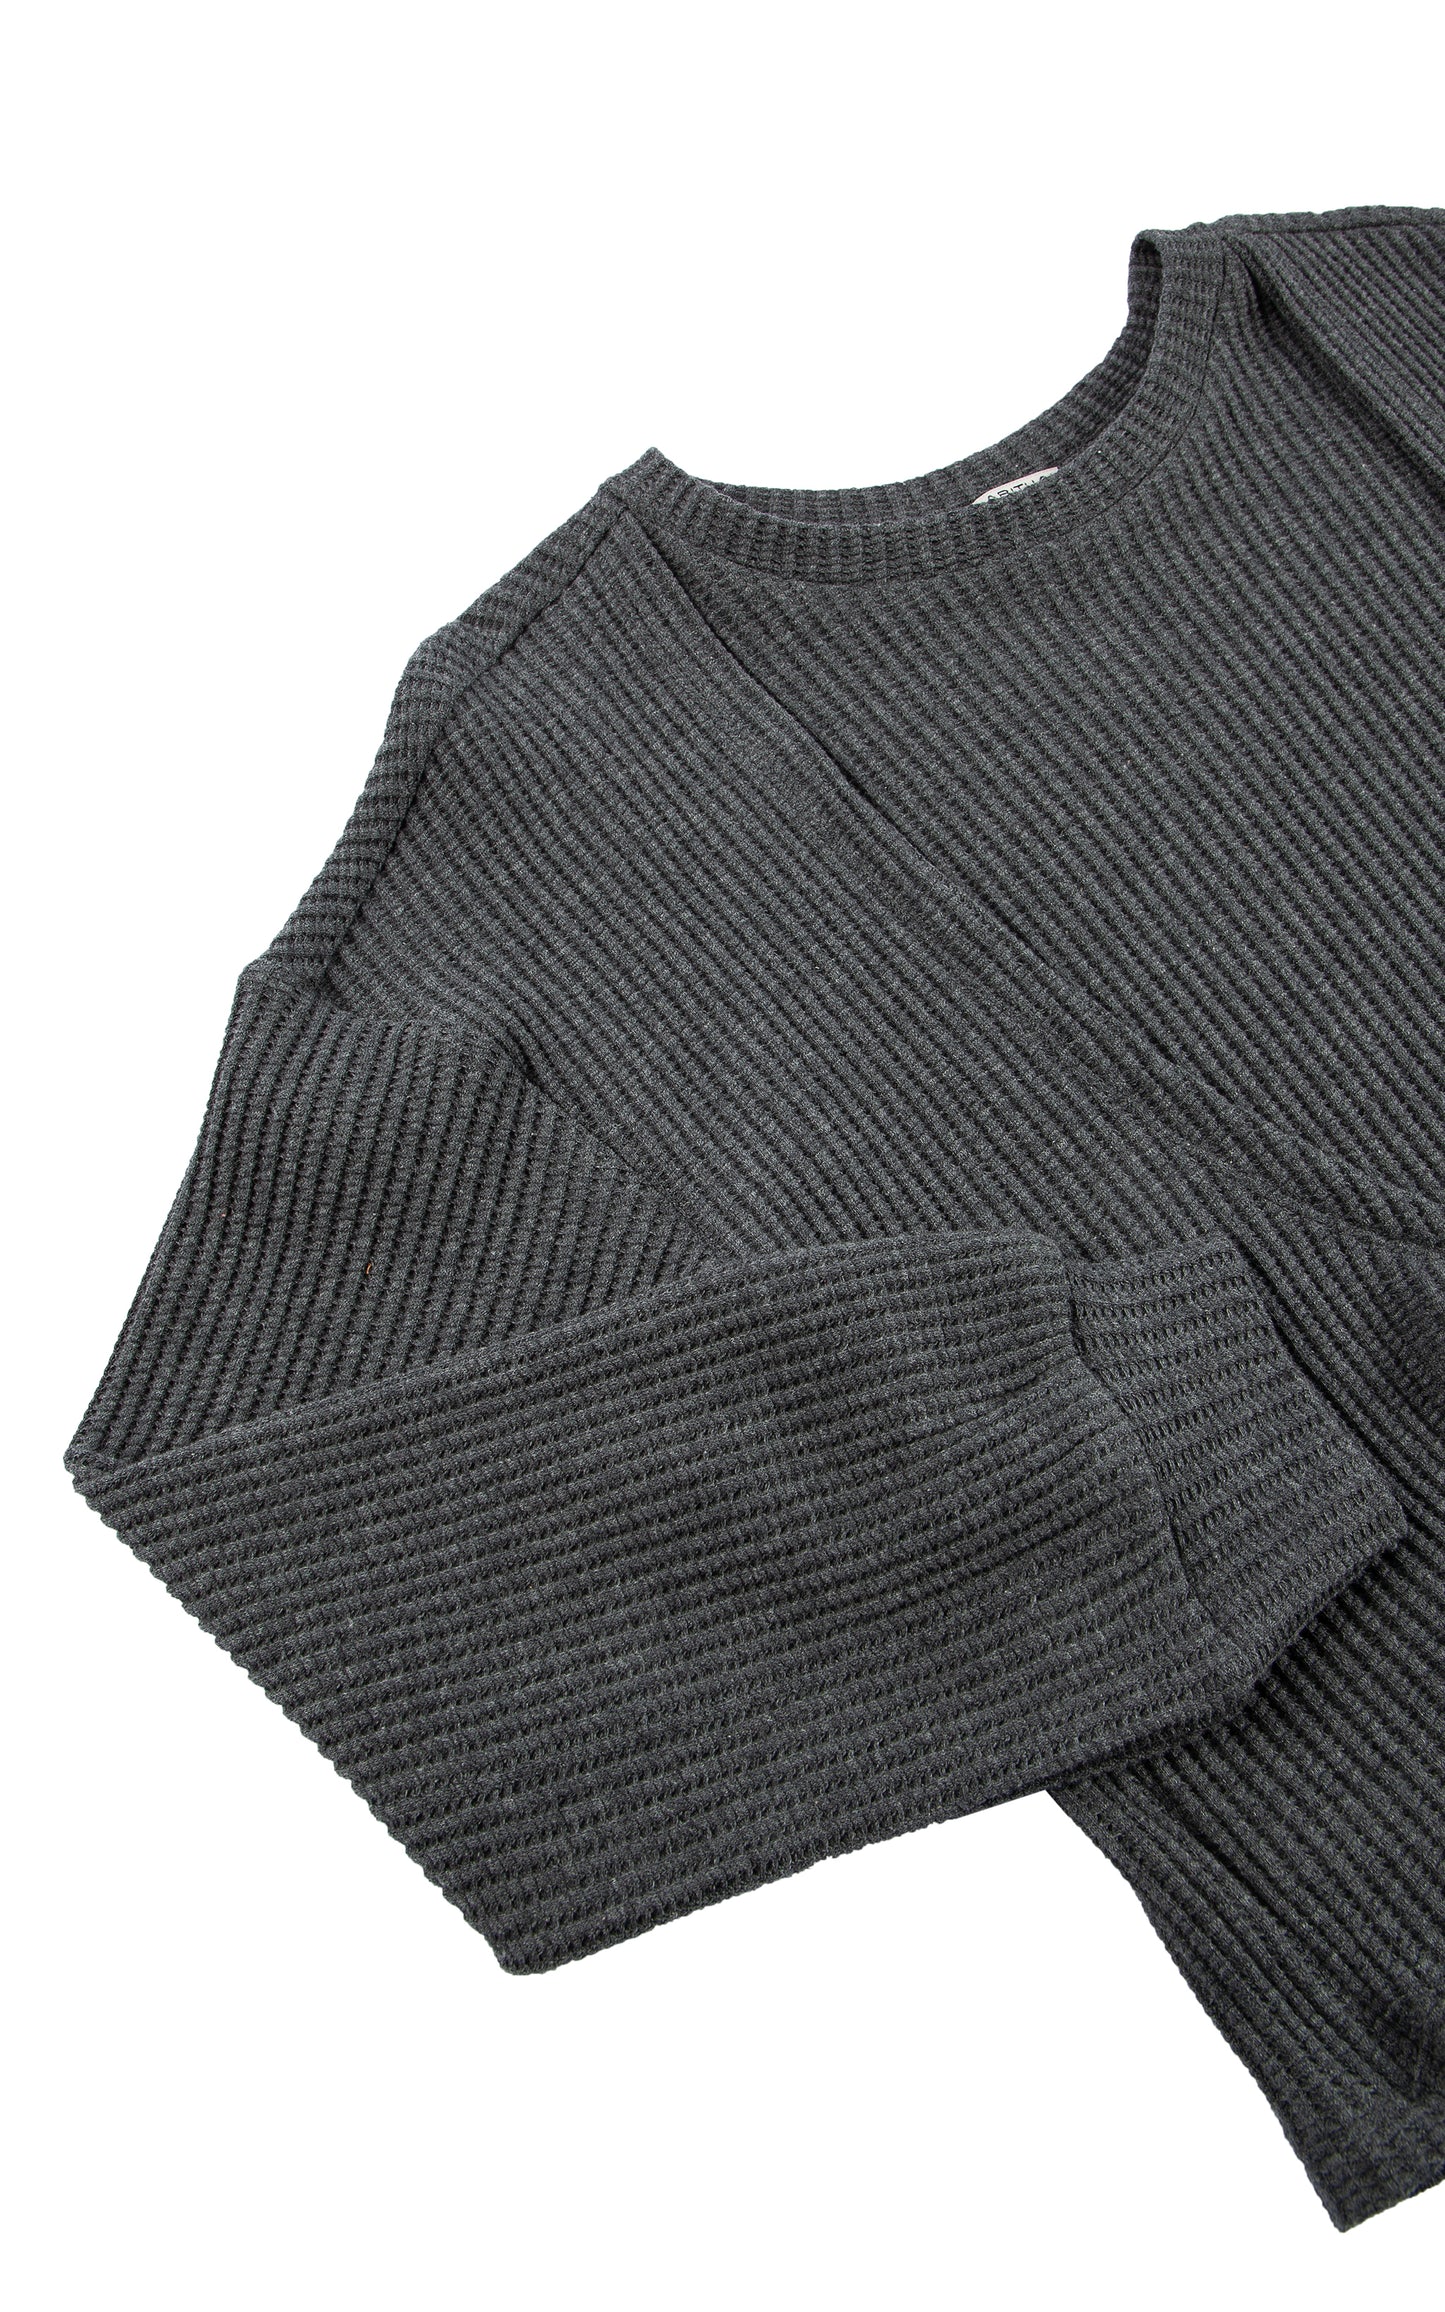 CLOSE UP OF DARK GREY  WAFFLE KNIT SWEATER WITH KNOT TWIST IN FRONT 